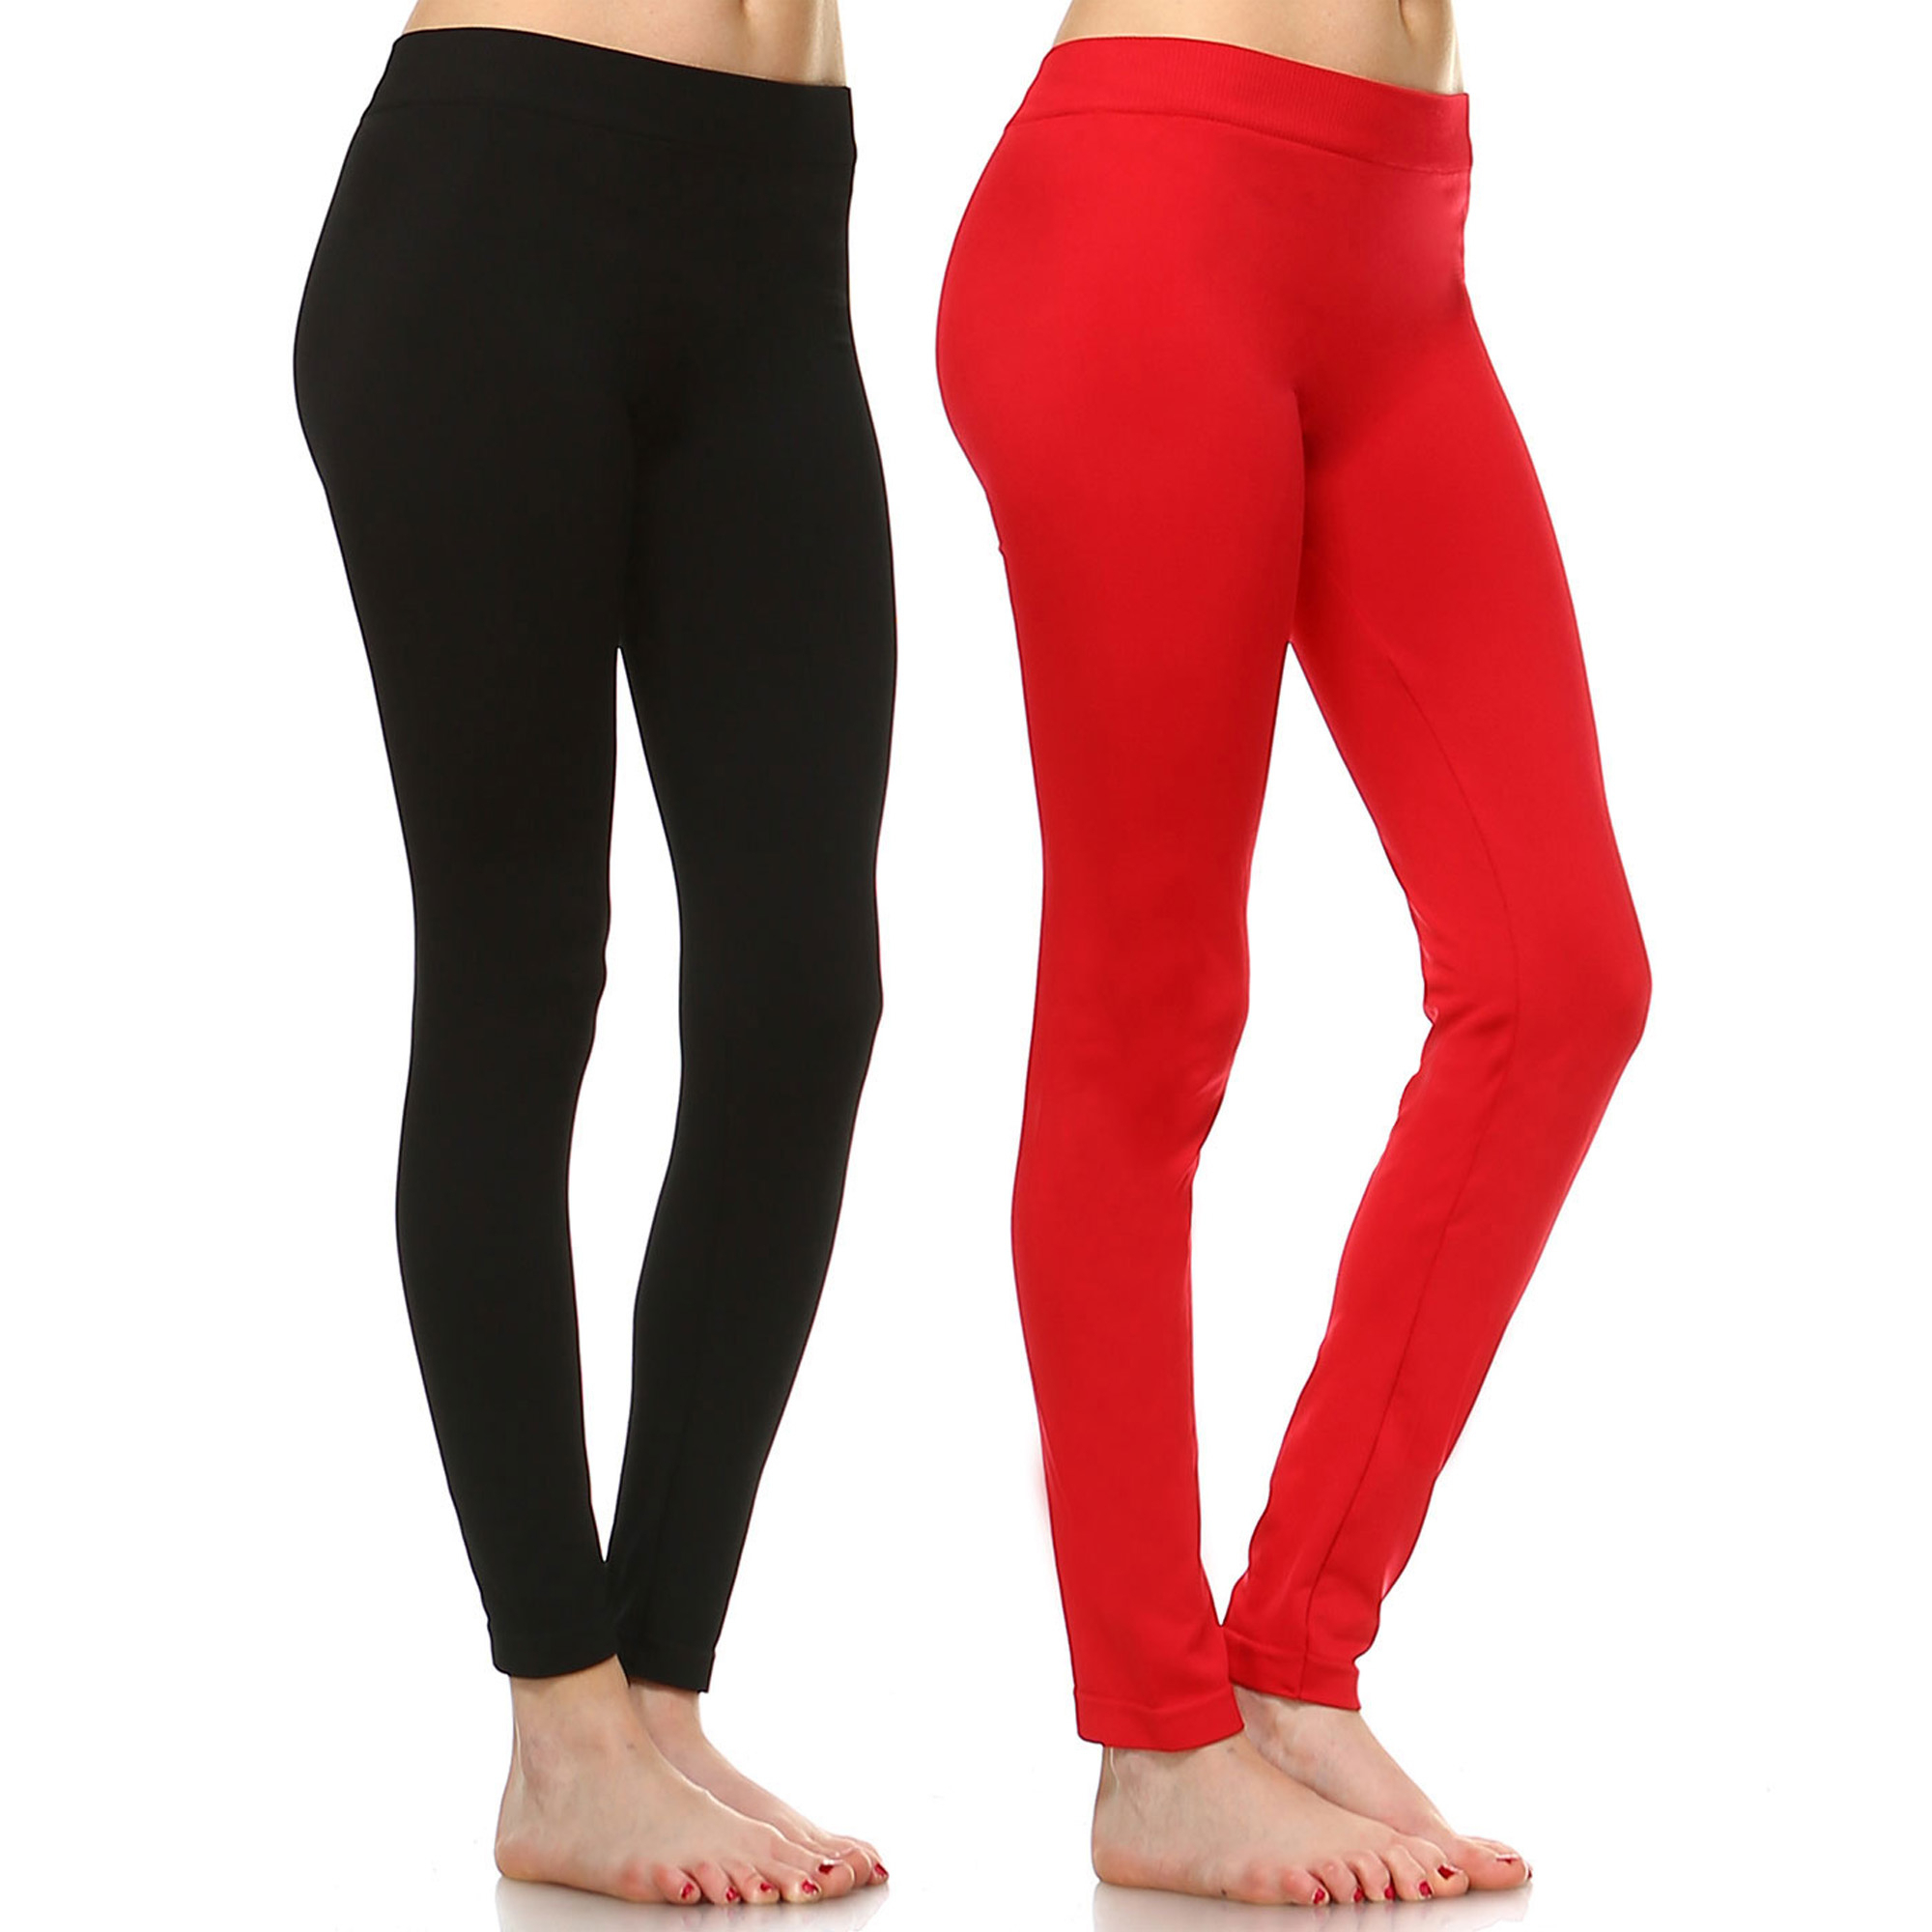 White Mark Women's Pack Of 2 Solid Color Leggings - Black, Red, One Size - Missy